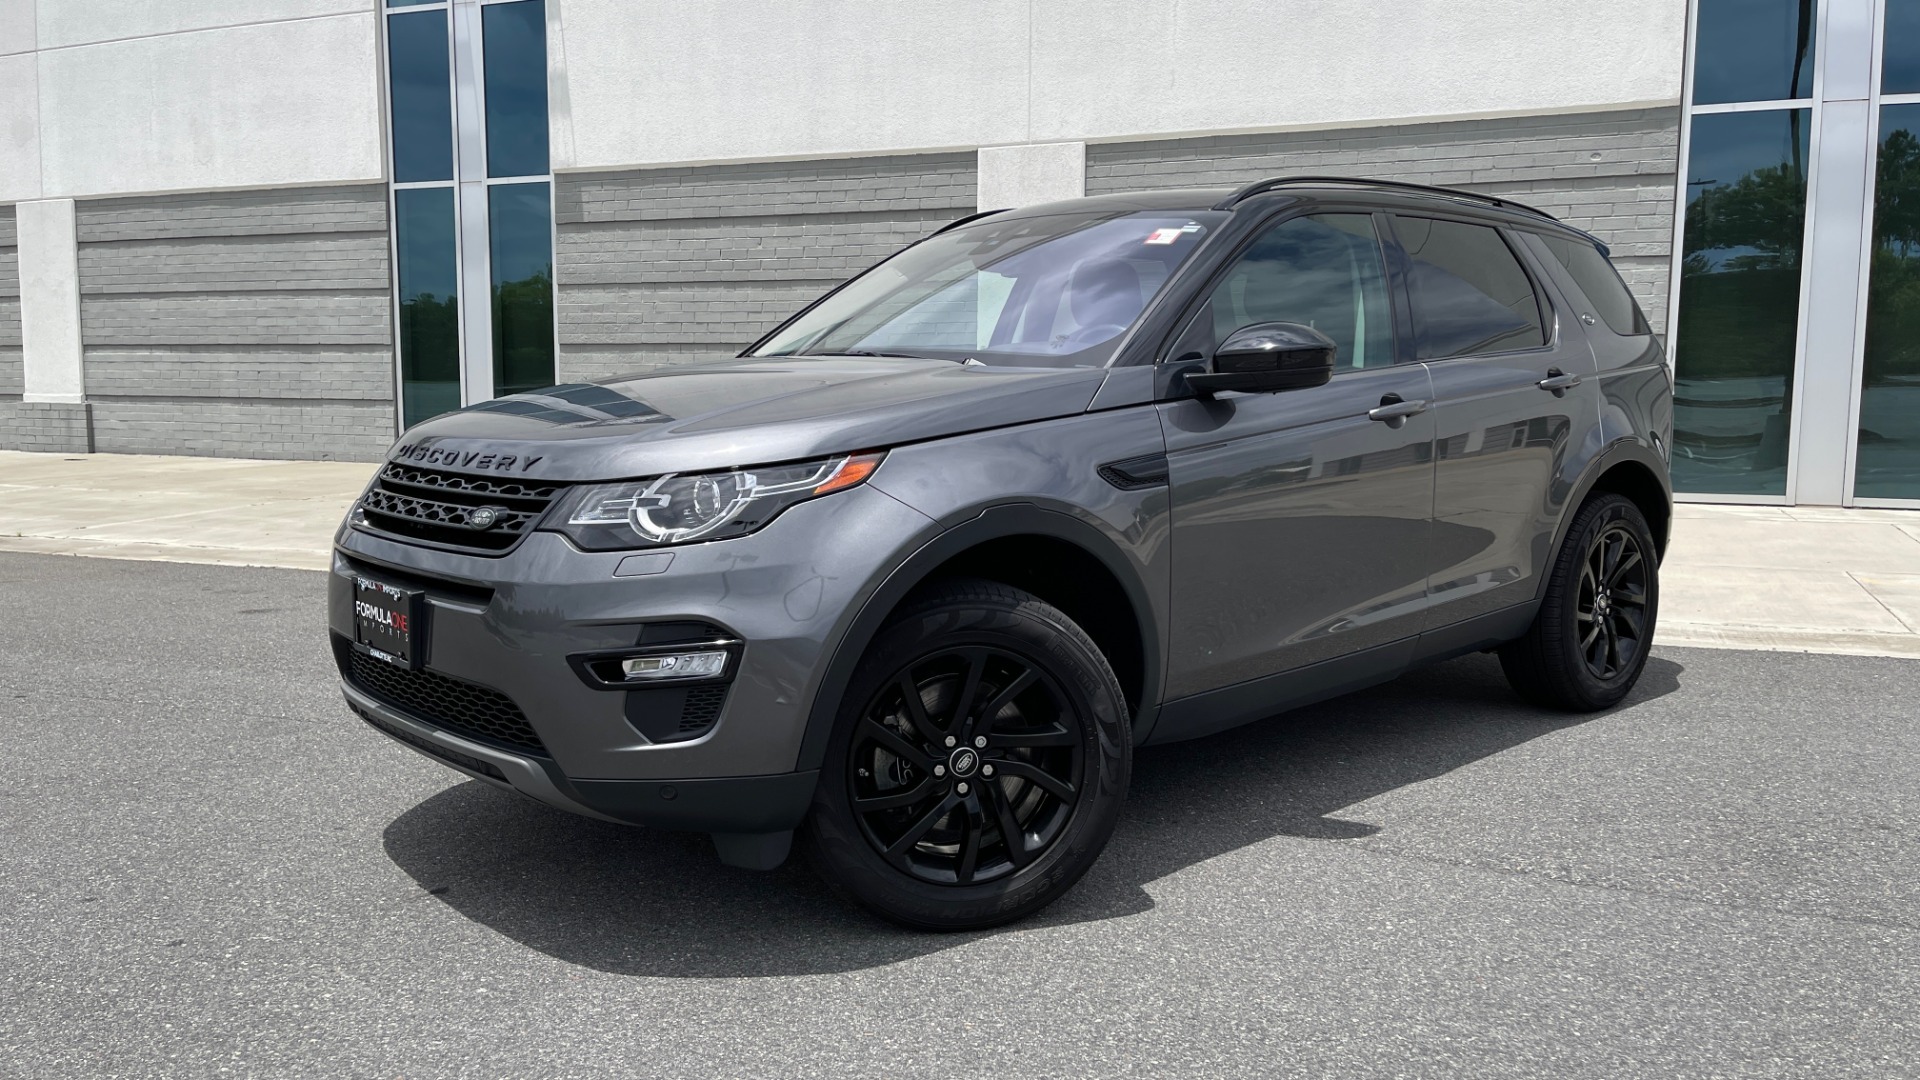 Used 2018 Land Rover DISCOVERY SPORT HSE 4WD / NAV / PANO-ROOF / MERIDIAN  SND / HTD STS / LANE ASST / REARVIEW For Sale ($34,295) | Formula Imports  Stock #F11211